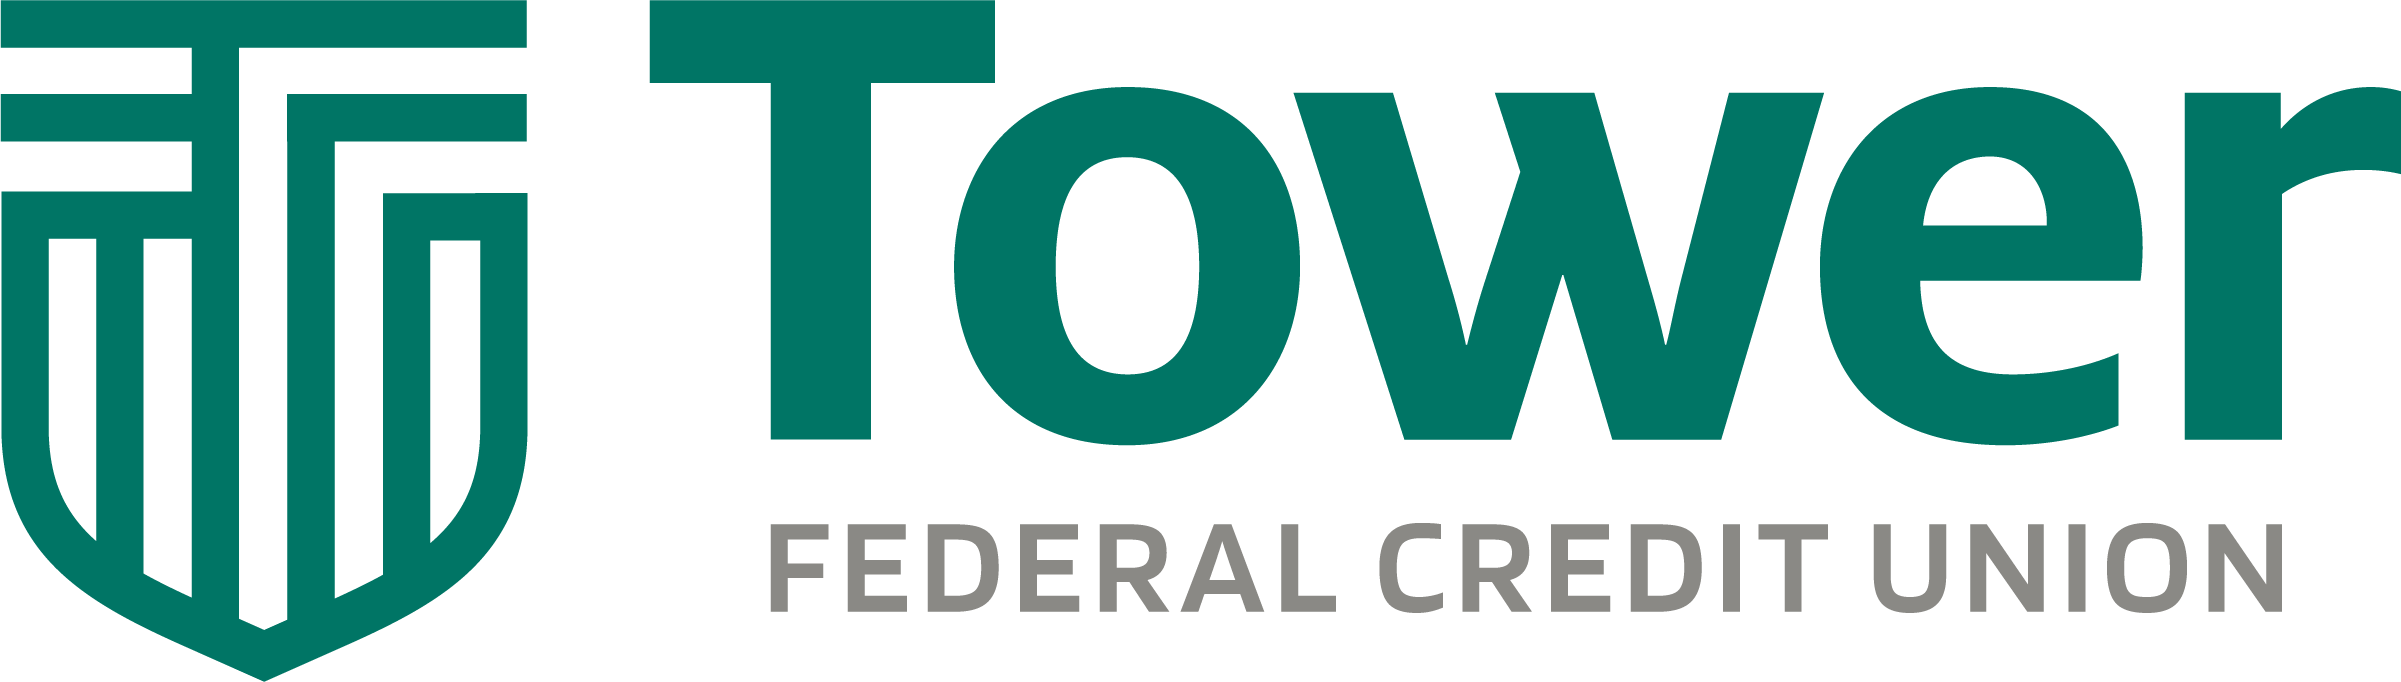 New Tower Federal Credit Union Logo